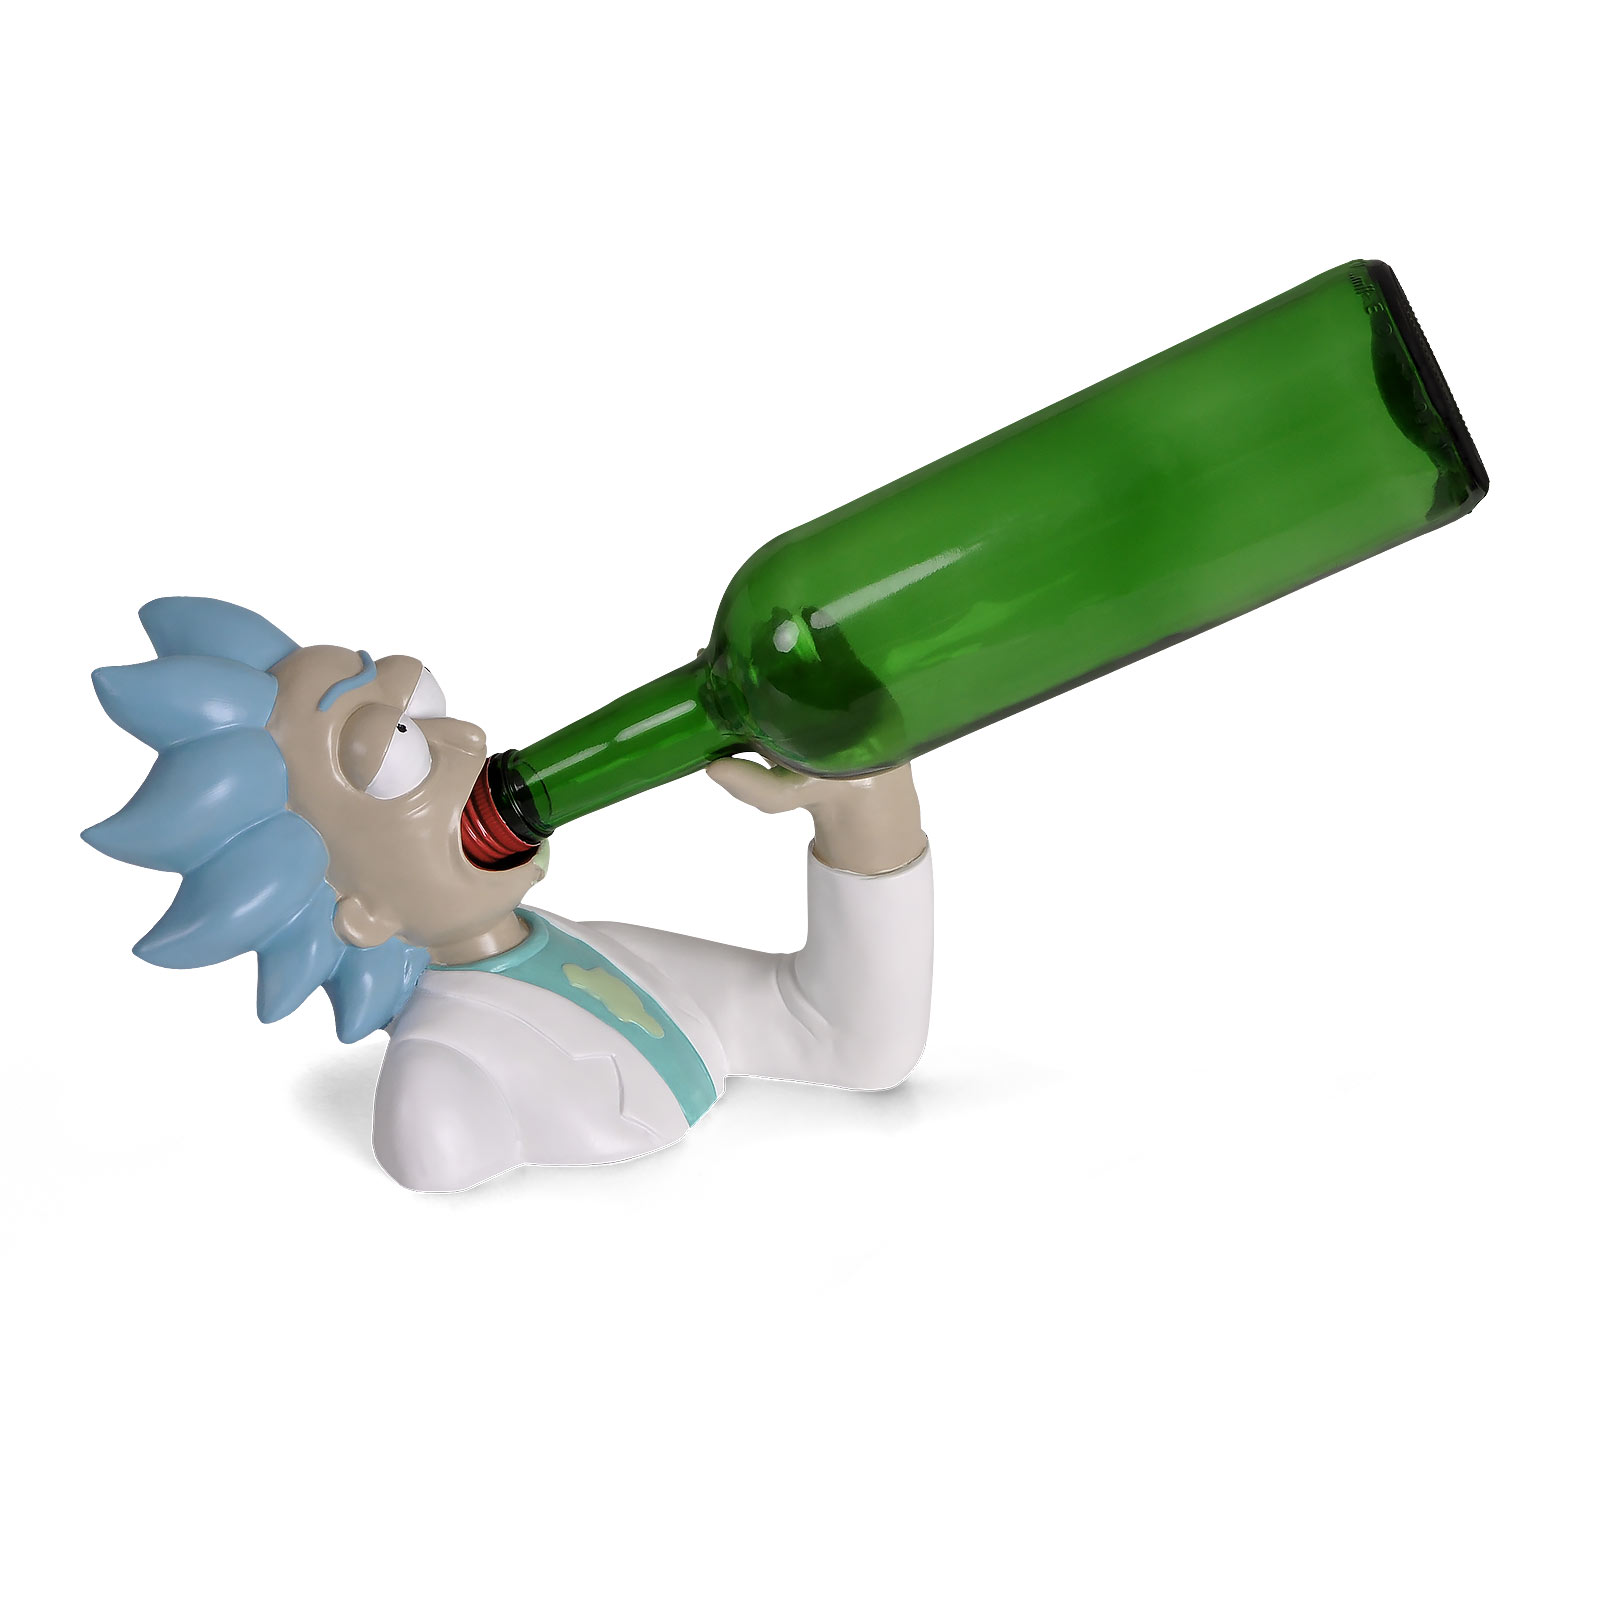 Rick and Morty - Thirsty Rick Bottle Holder